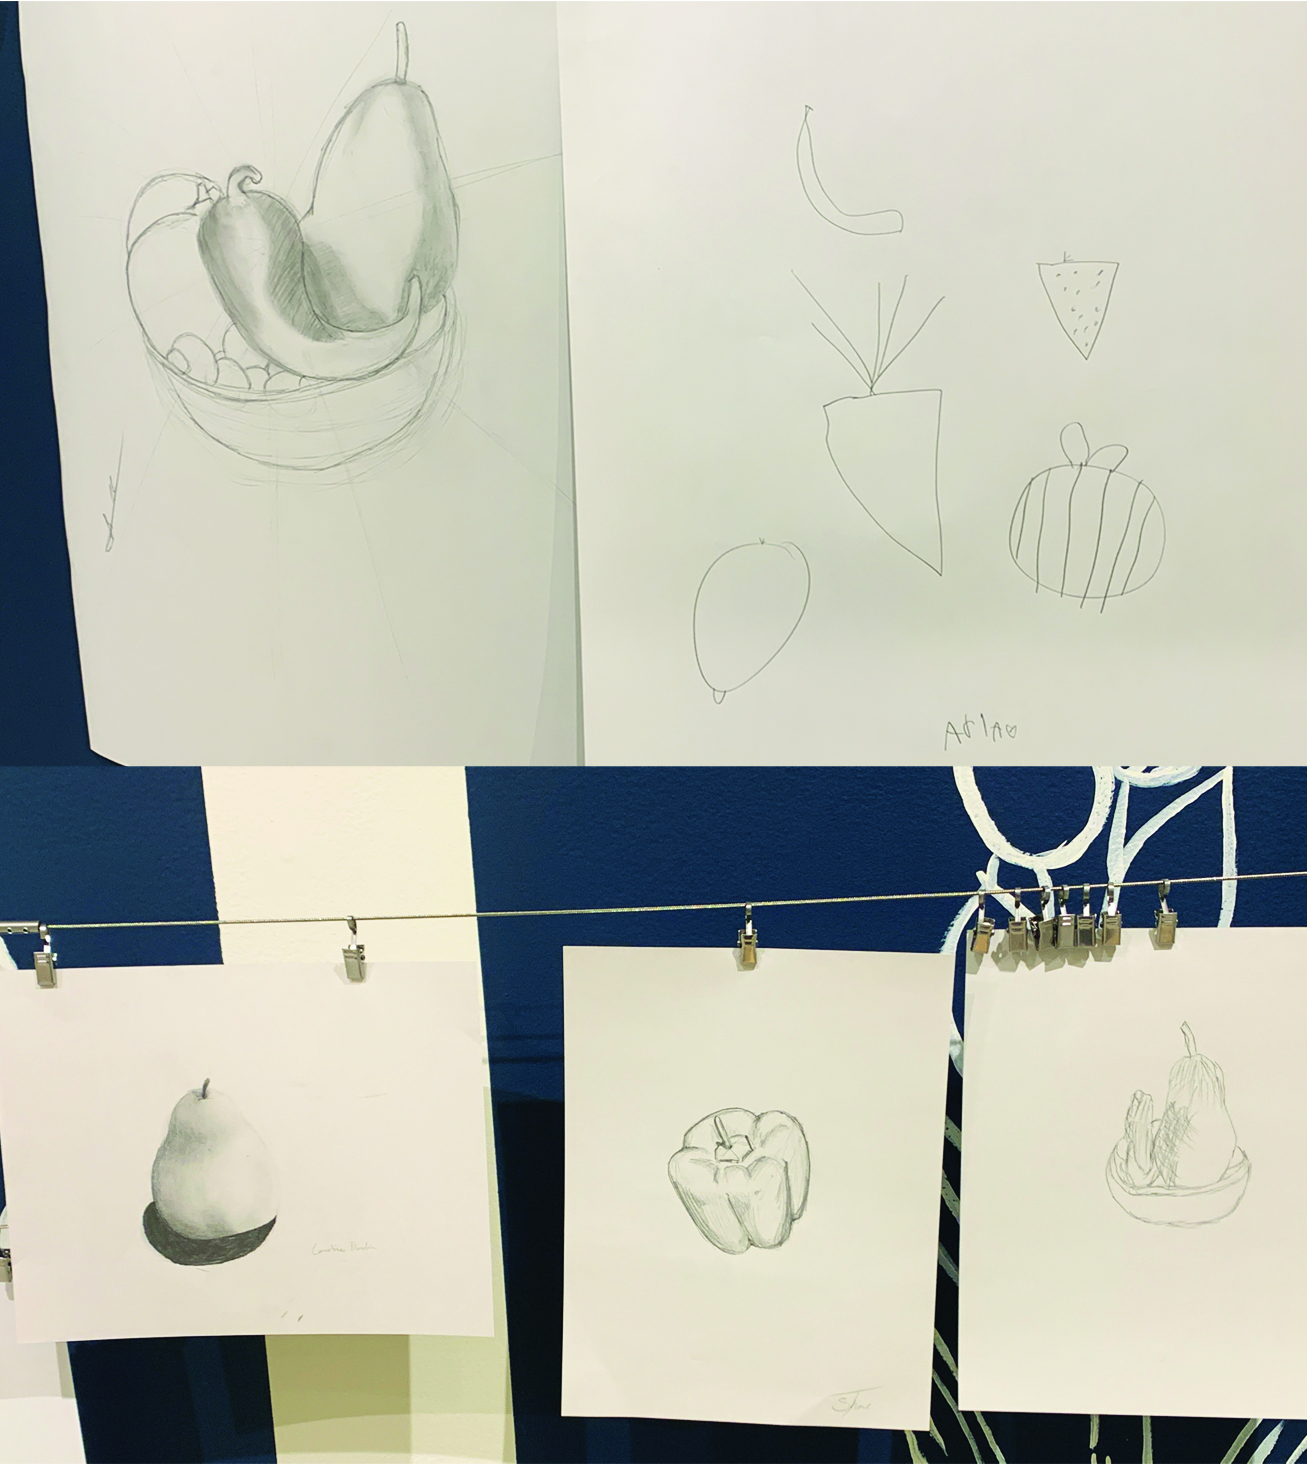 Graphite drawings hang on the wall in Art Park, showcasing a range of skill levels, sketching techniques, and a variety of fruits and vegetables as subjects.